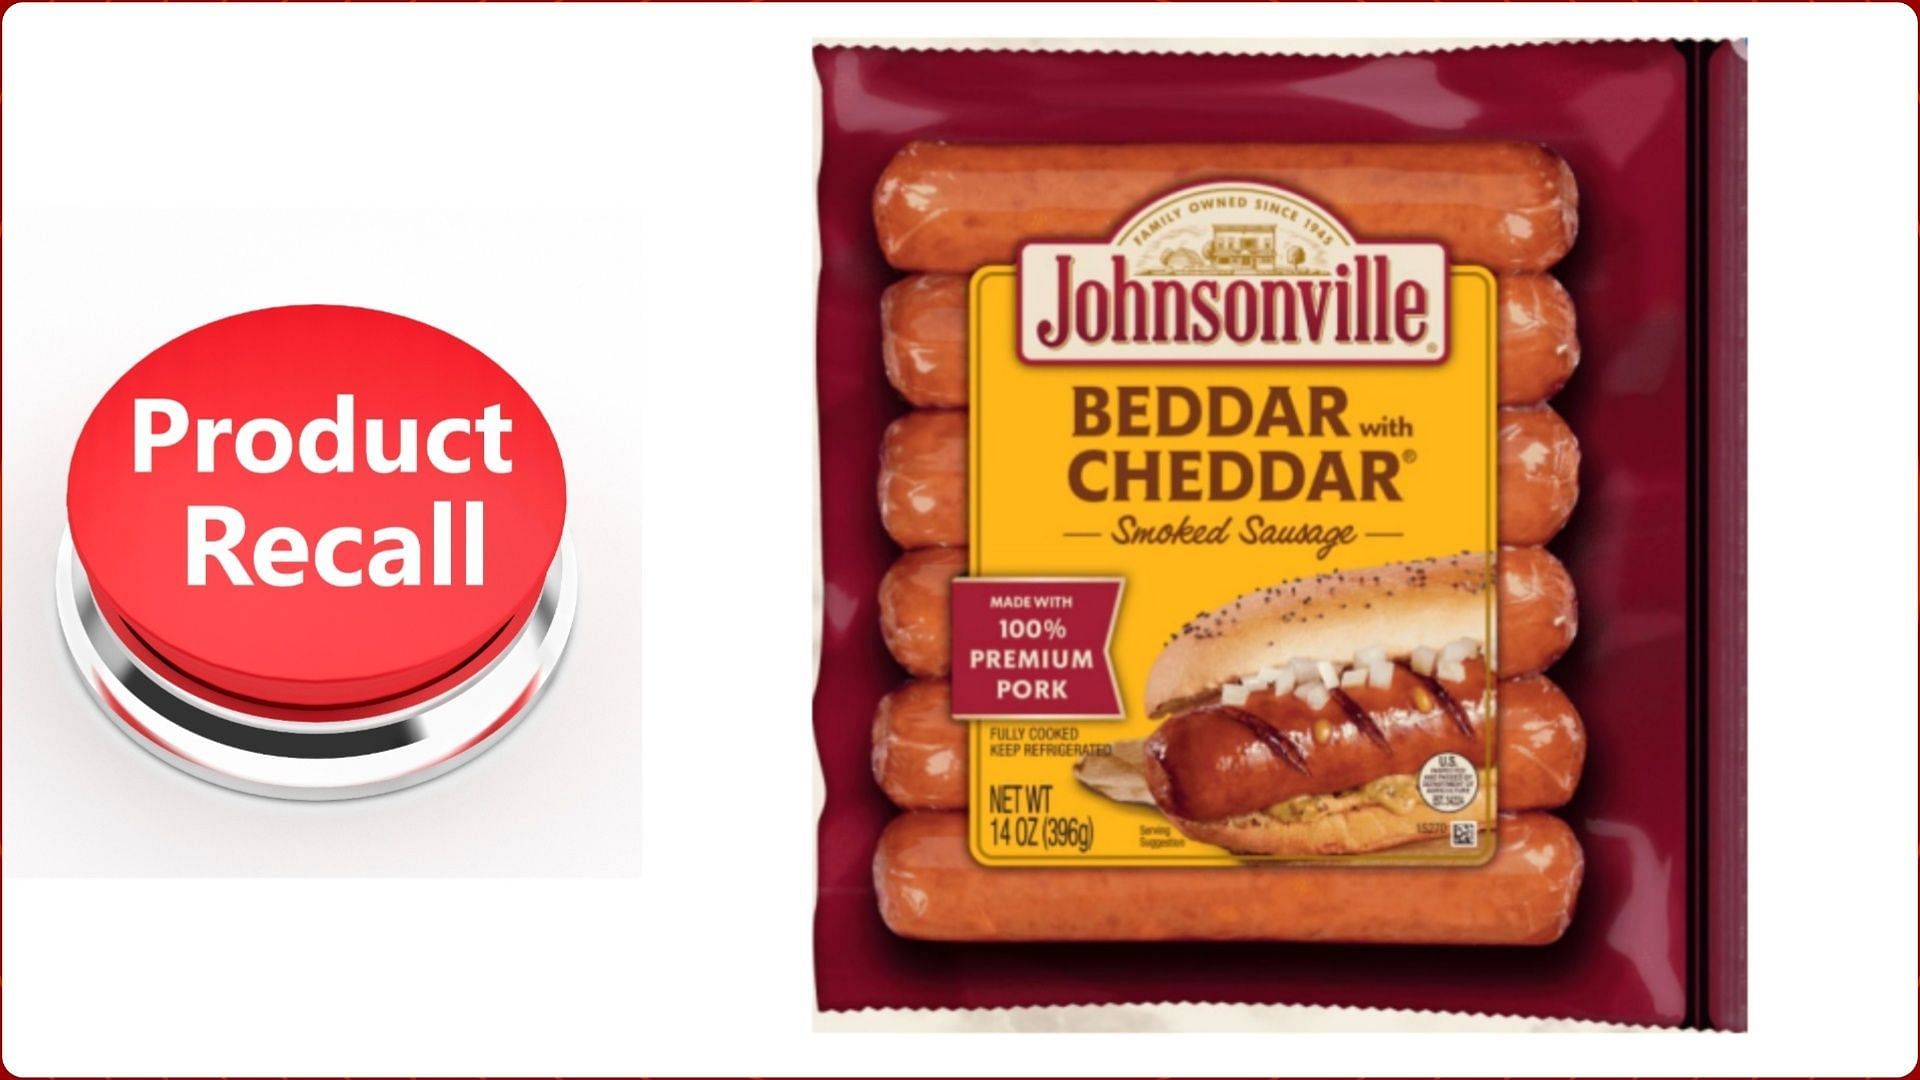 Johnsonville, LLC recalls ready-to-eat &ldquo;Beddar with Cheddar&rdquo; pork sausages over an extraneous material contamination concern (Image via FSIS)